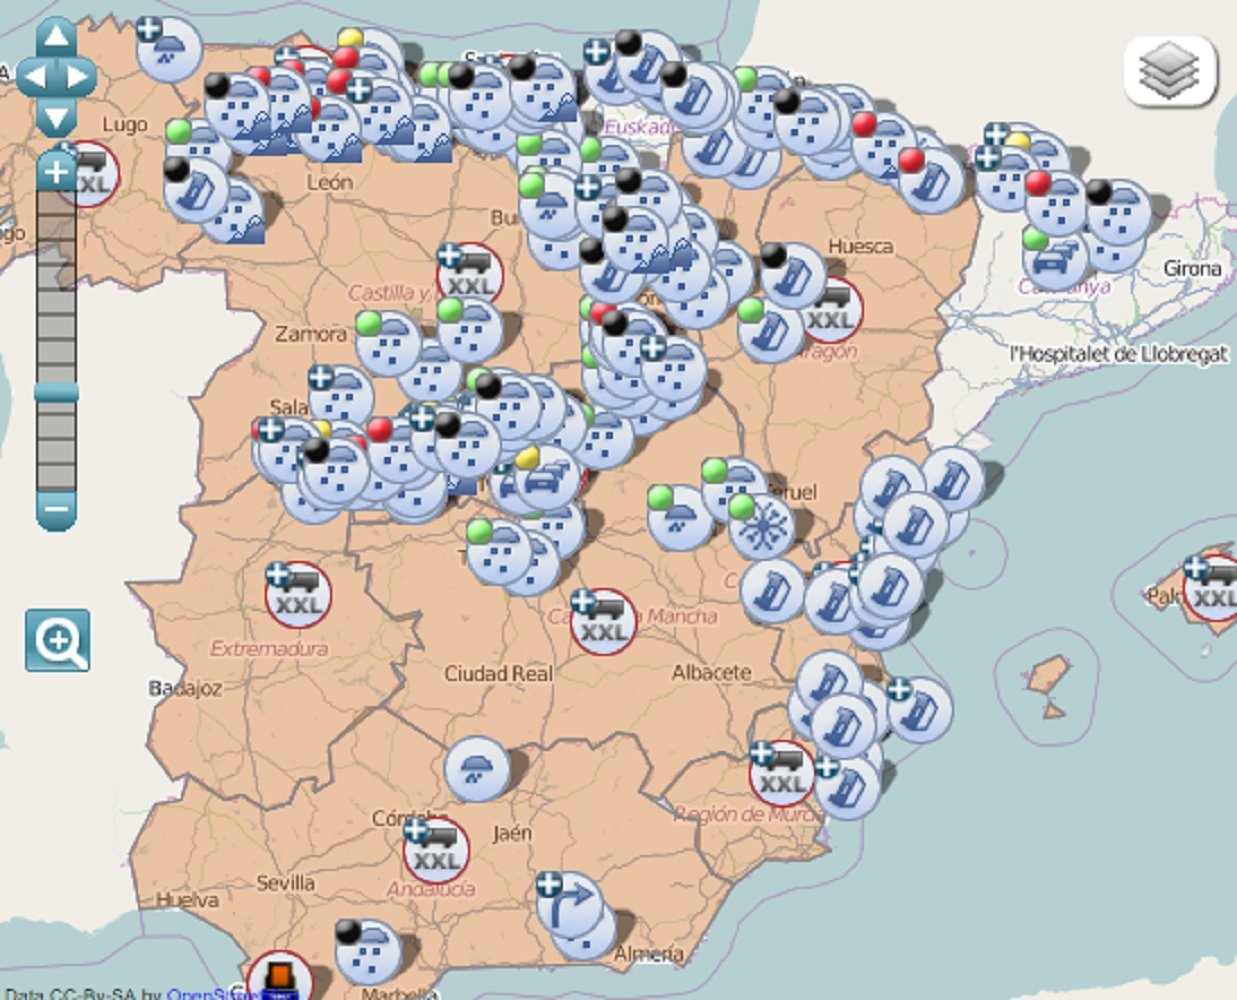 Catalonia is already independent on Spanish traffic authority's maps